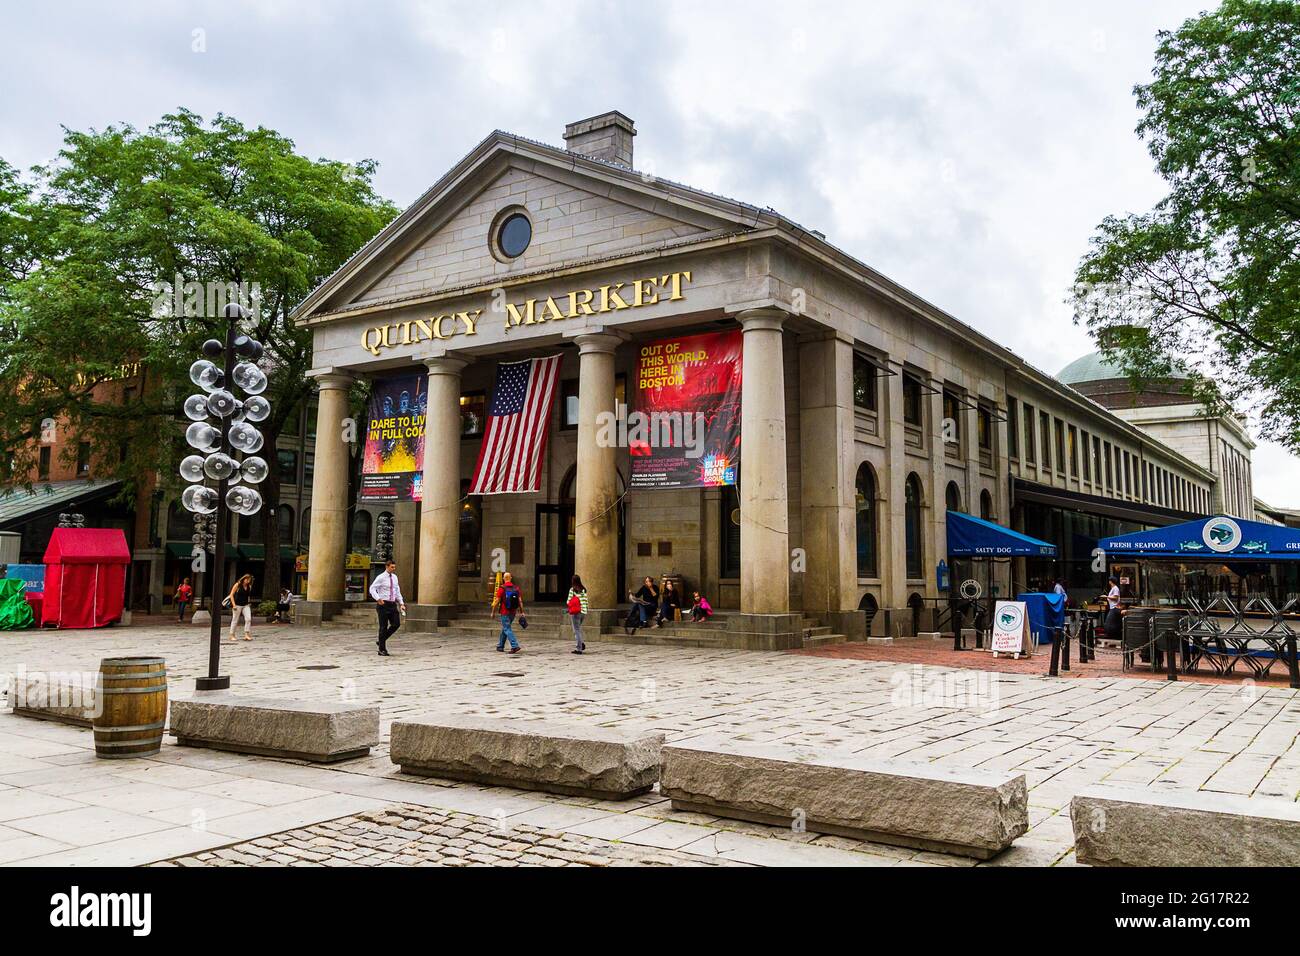 West side of Quincy Market and people walking around Stock Photo